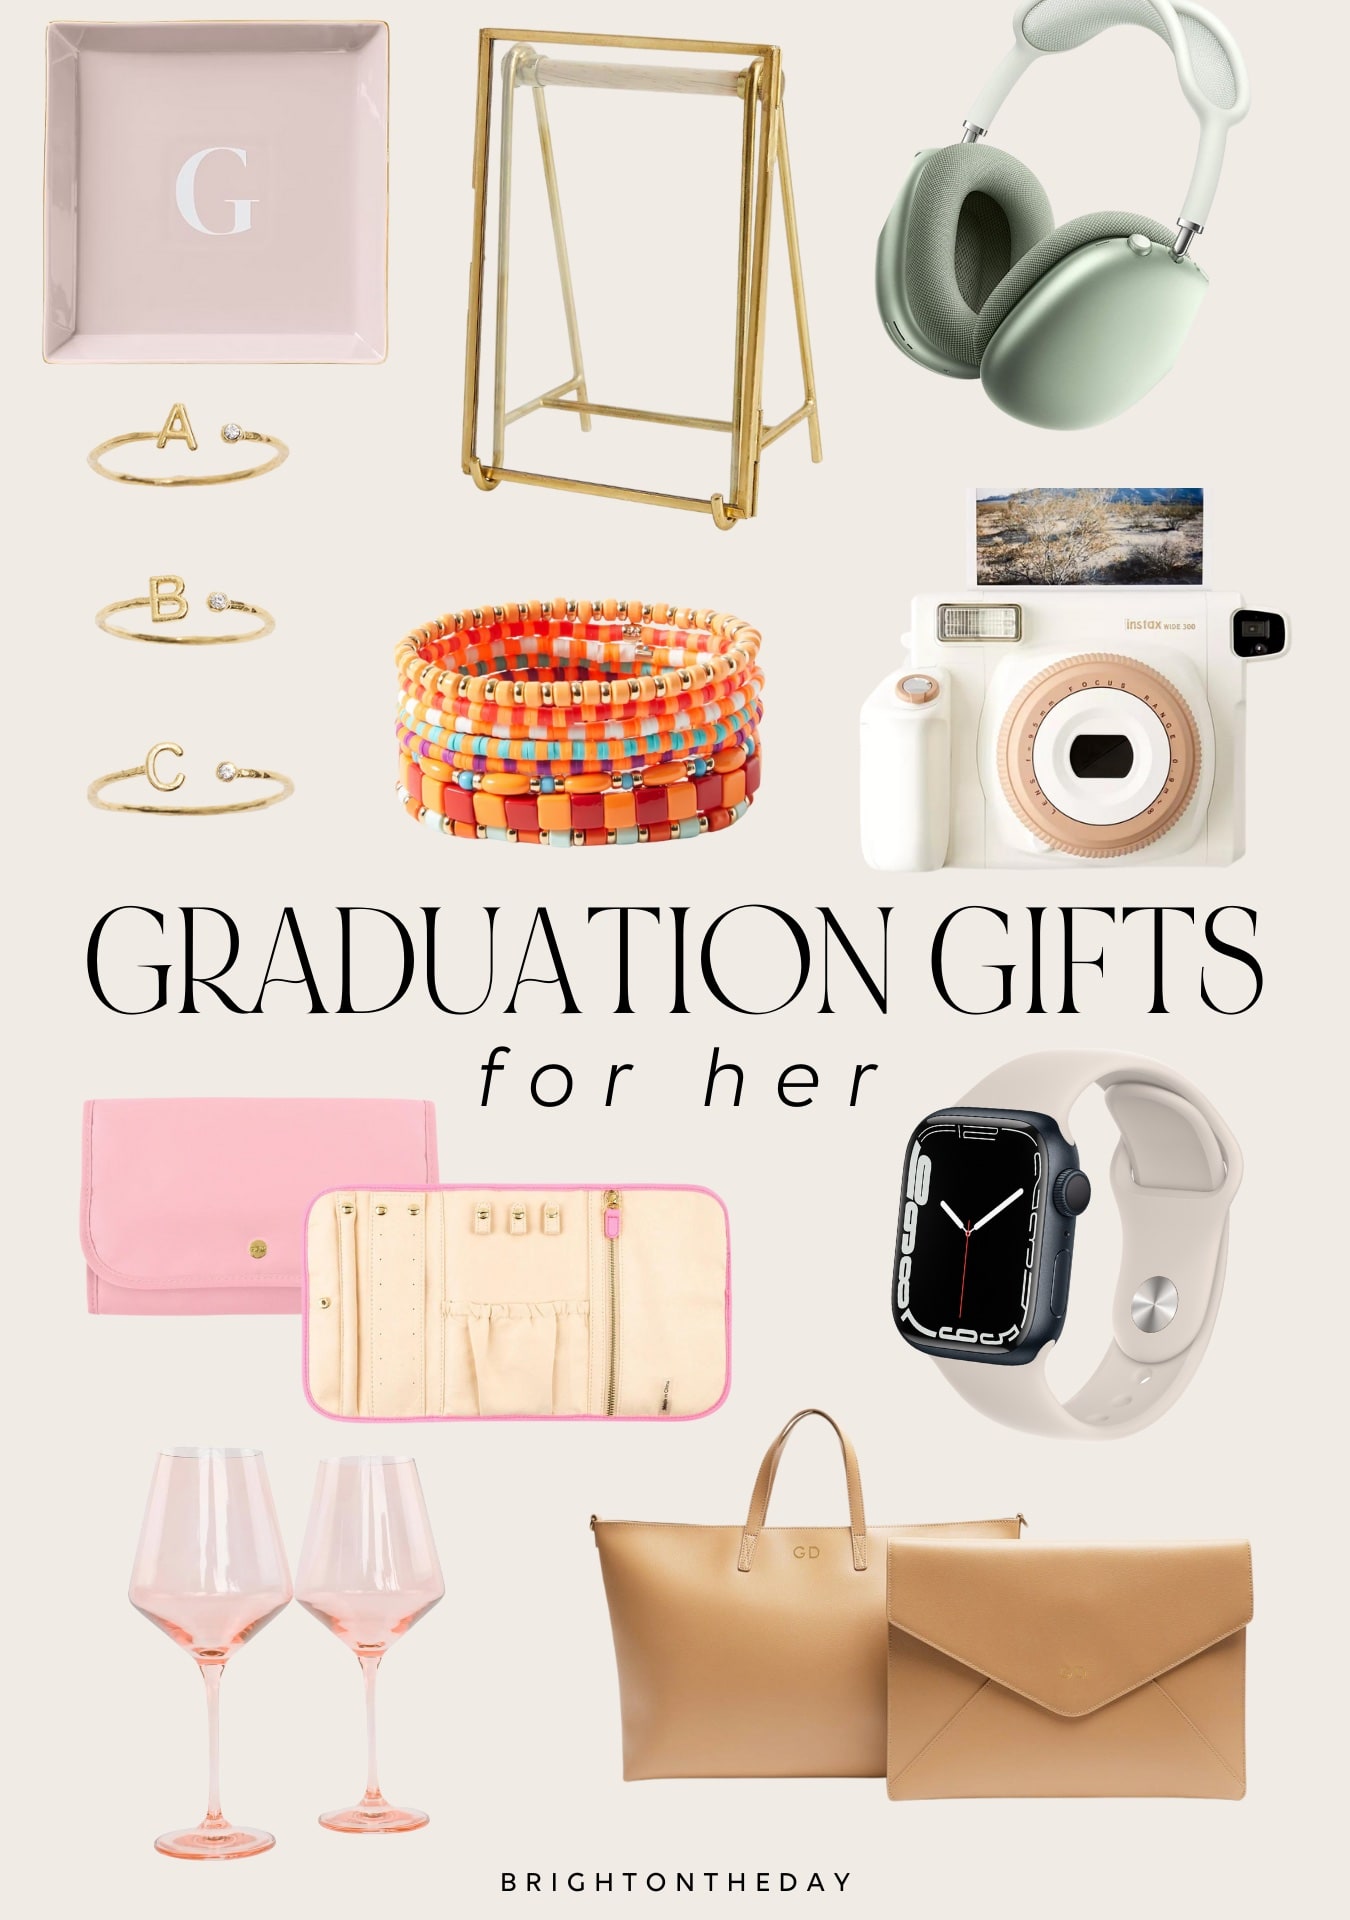 Brighton Butler Graduation Gifts for her